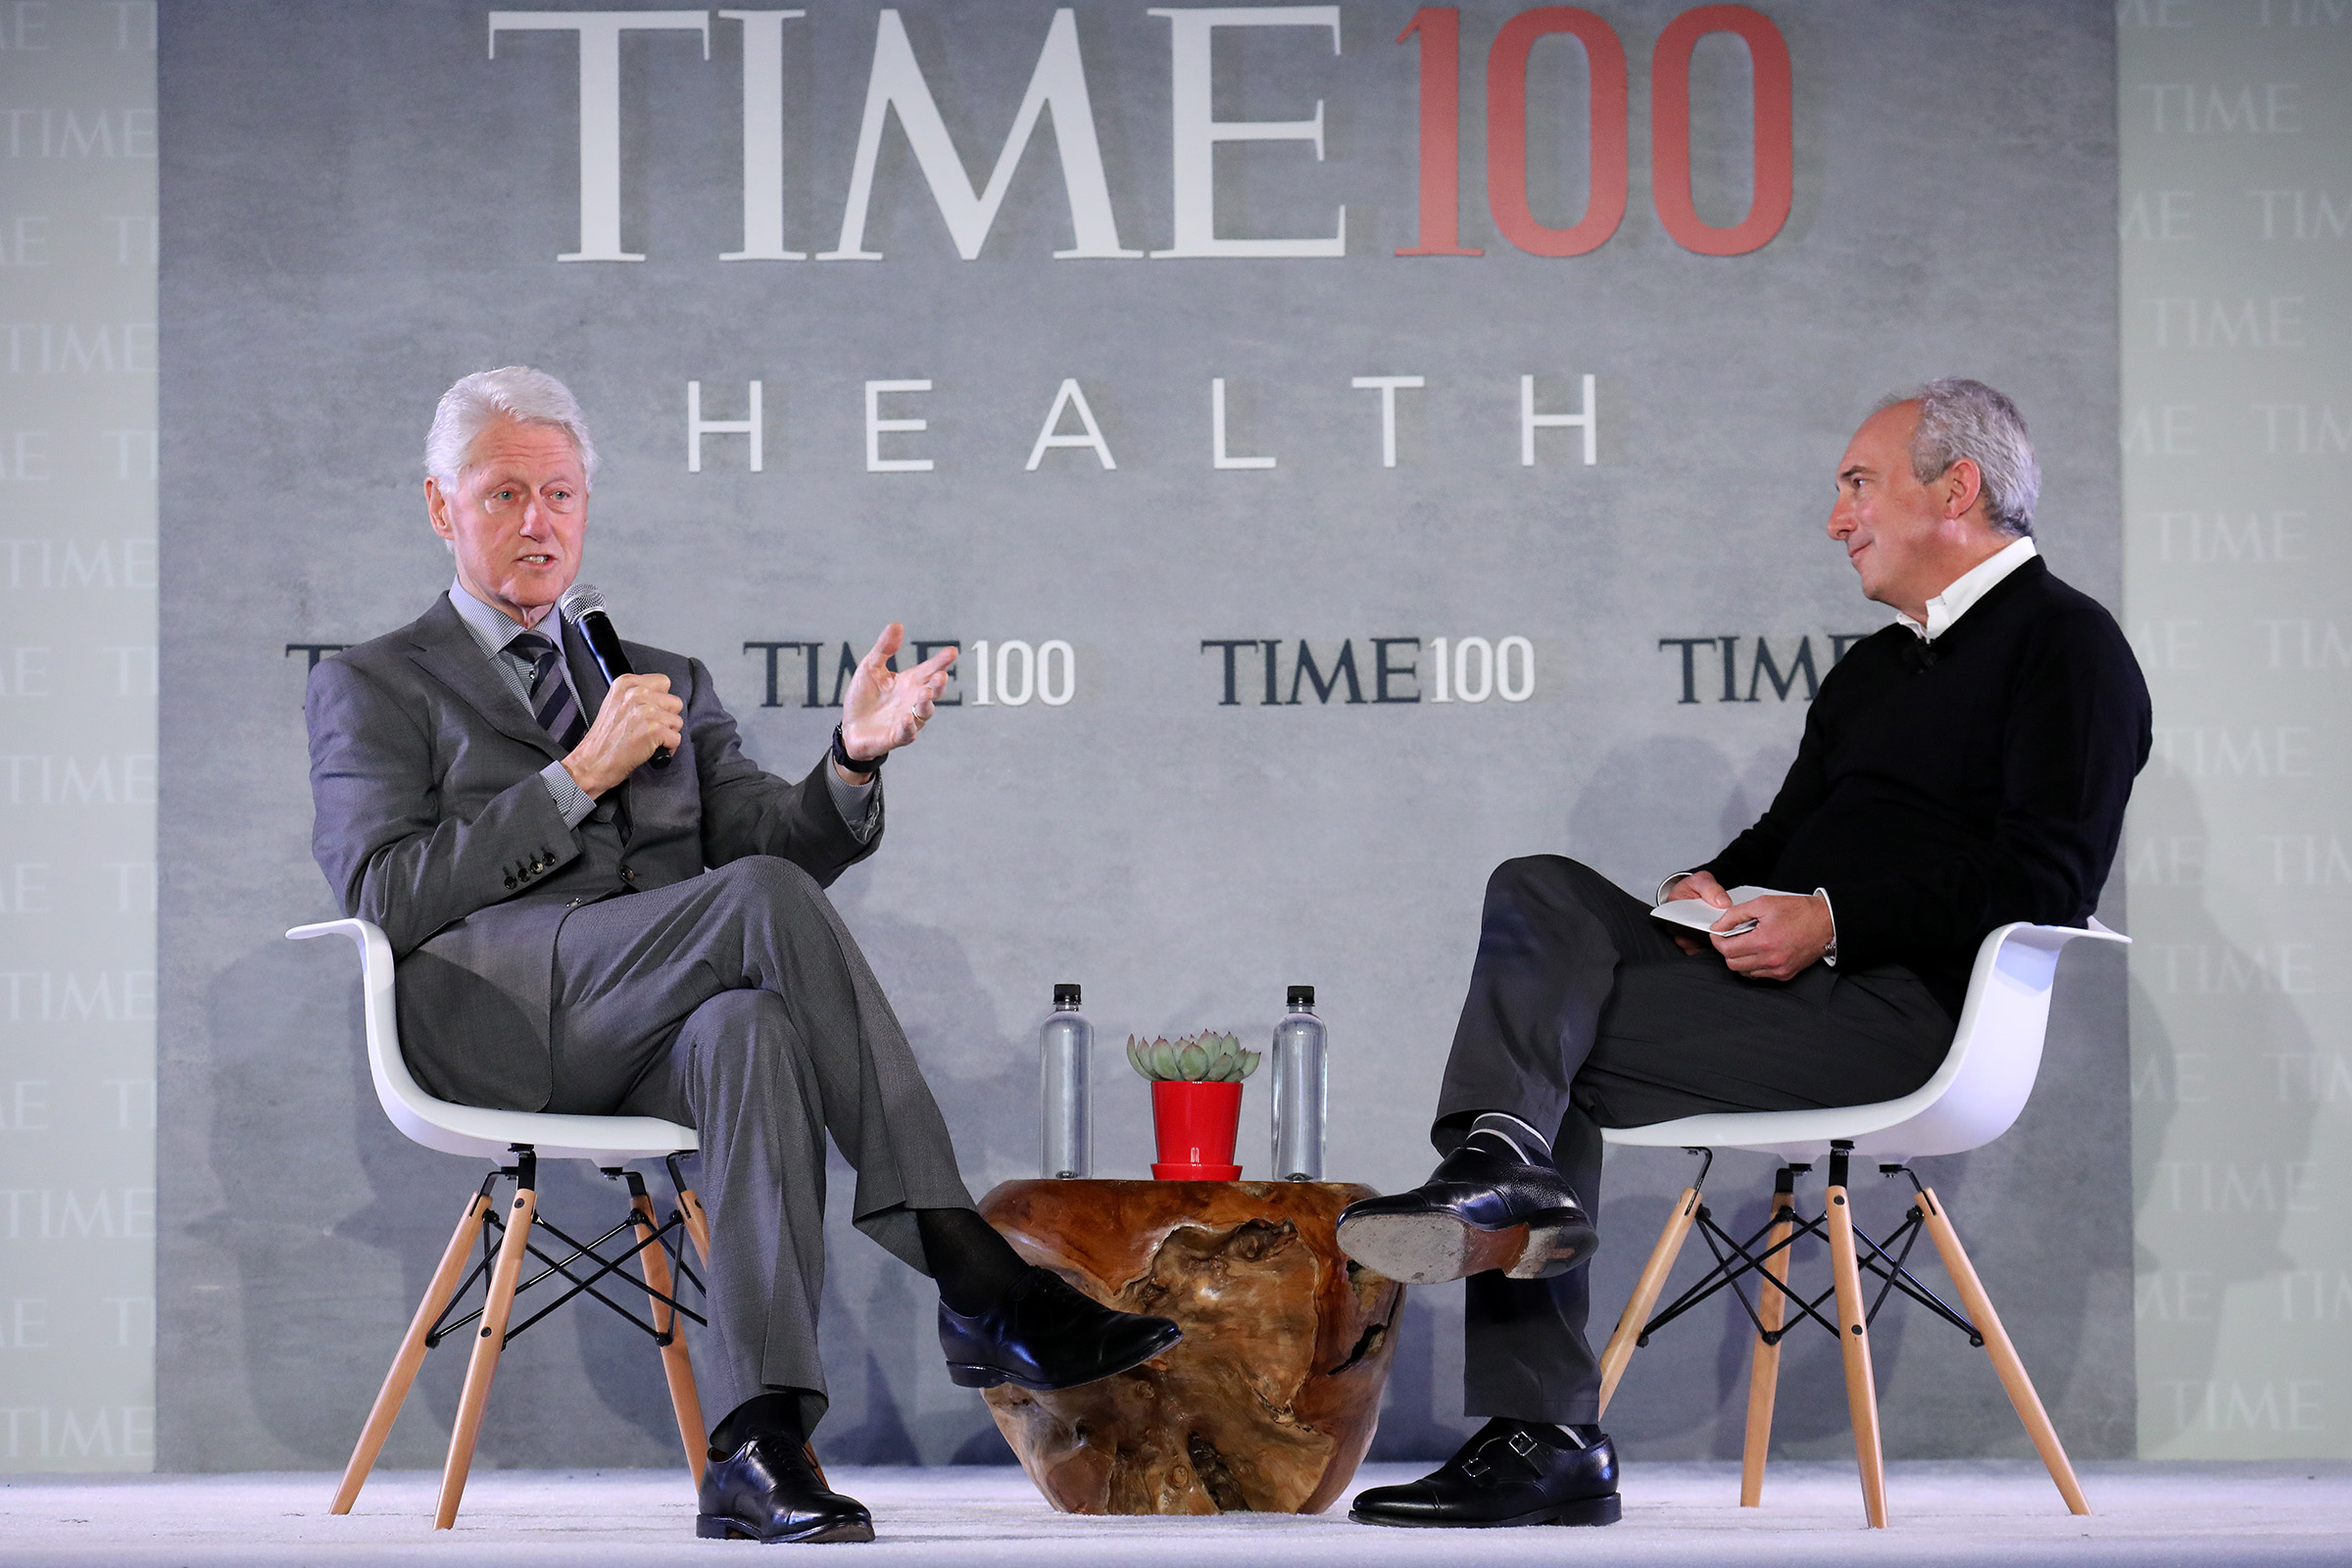 Former U.S. President Bill Clinton (L) speaks with CEO of the Lawrence J. Ellison Institute for Transformative.Medicine of USC and TIME 100 Health Summit Co-Chair, Dr. David Agus, onstage during the TIME 100 Health Summit at Pier 17 in New York City on Oct. 17, 2019. (Brian Ach—Getty Images for TIME 100 Health)